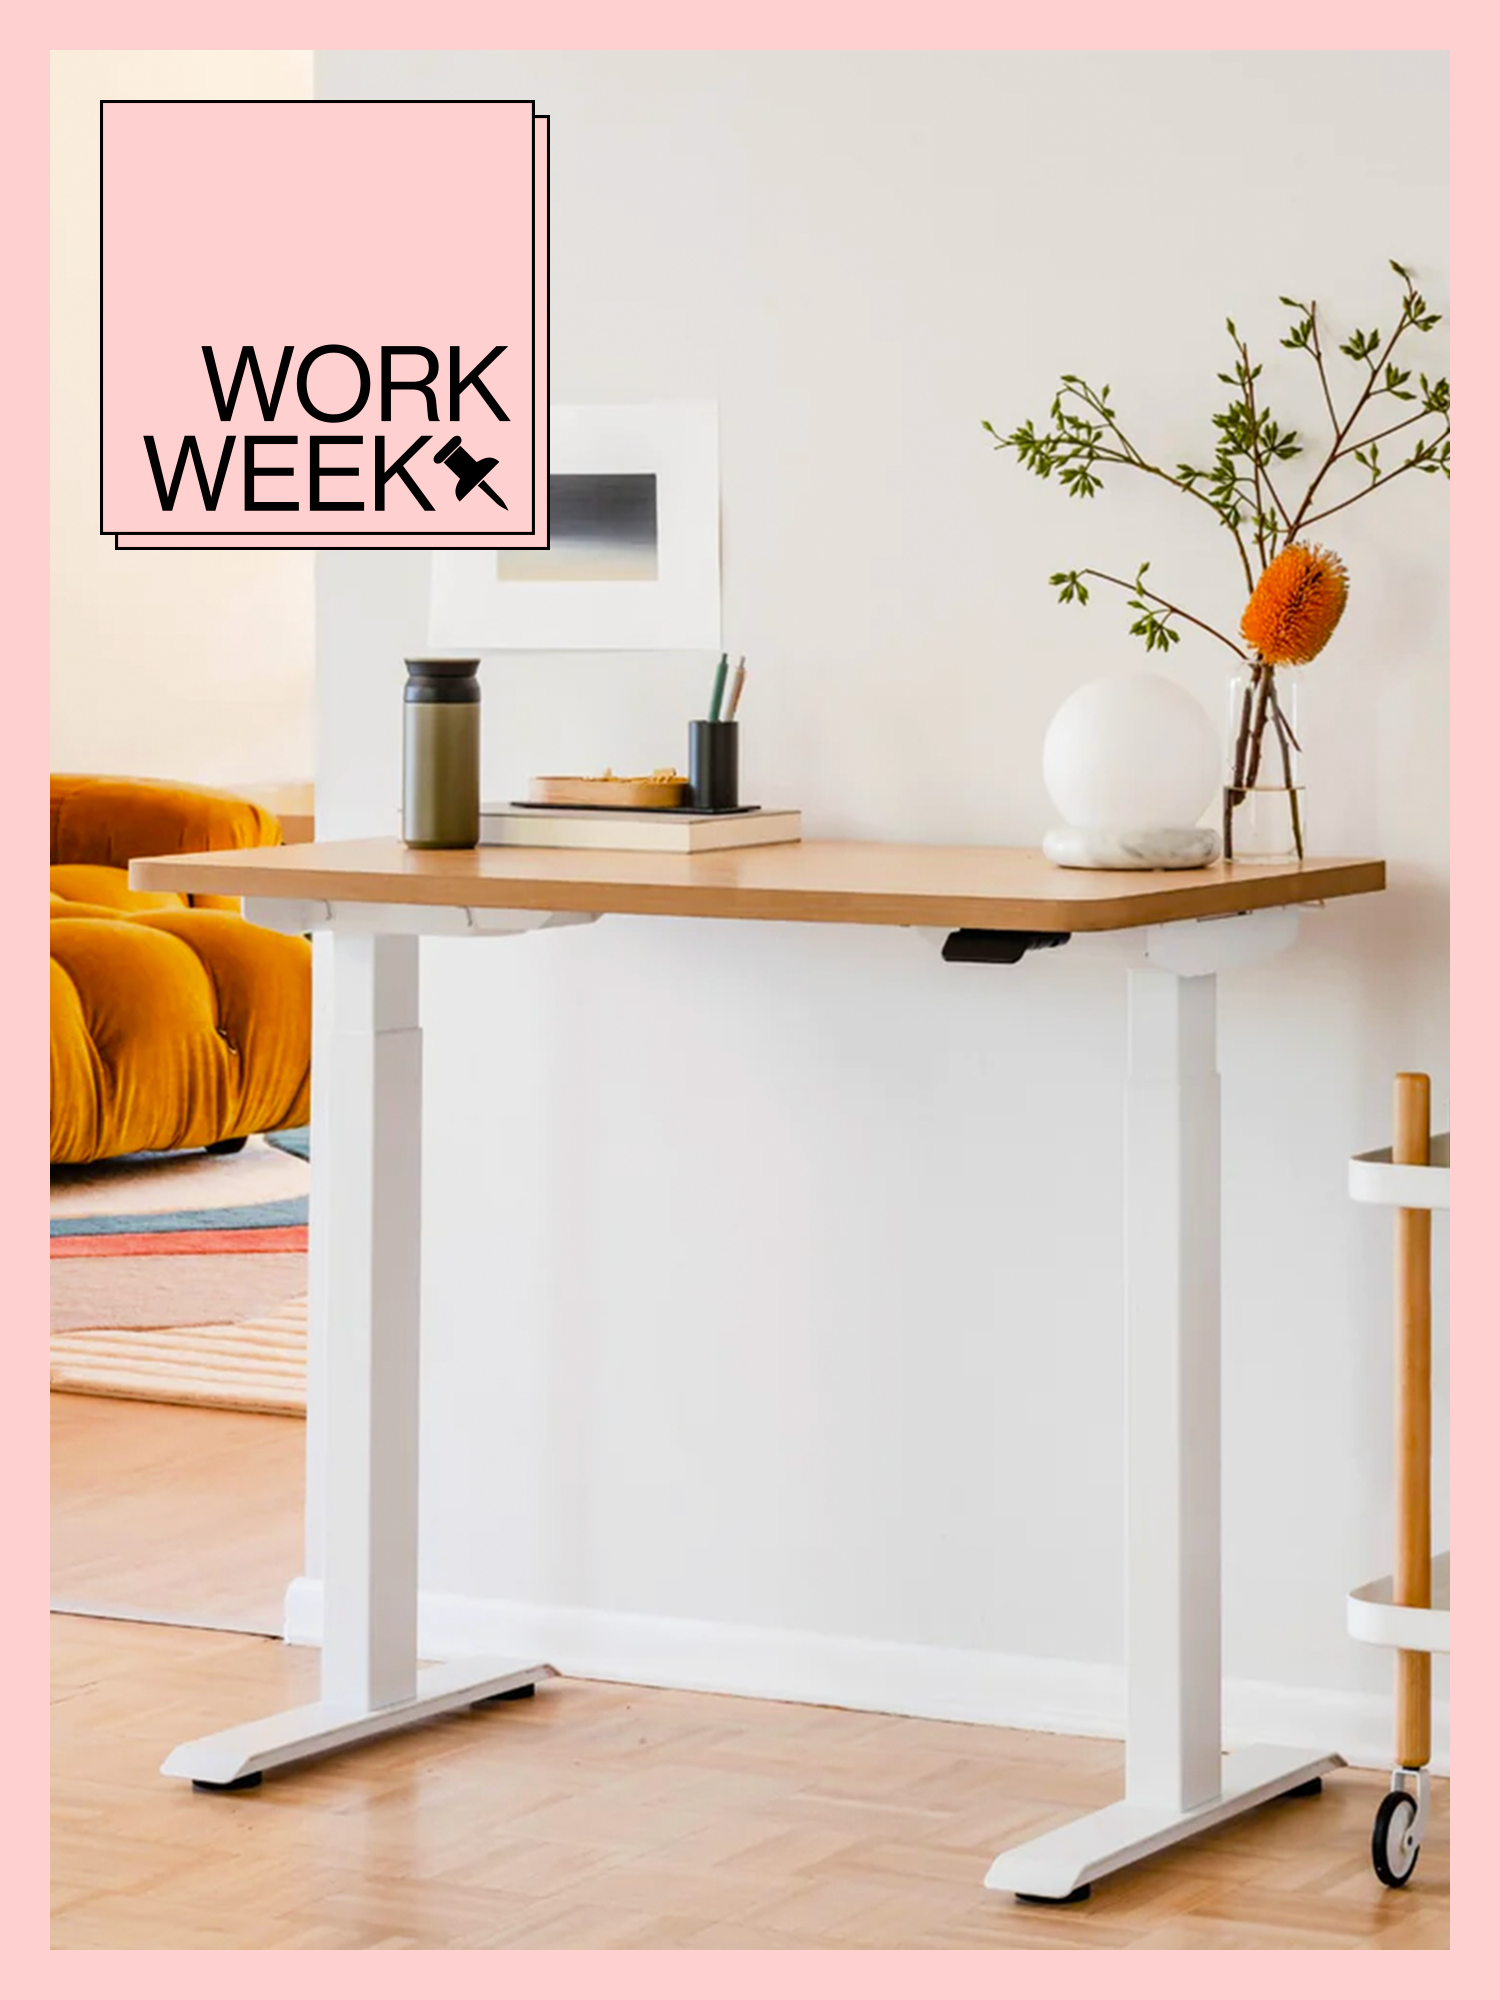 Branch Duo Standing Desk in white room with pink Work Week design border and treatment.